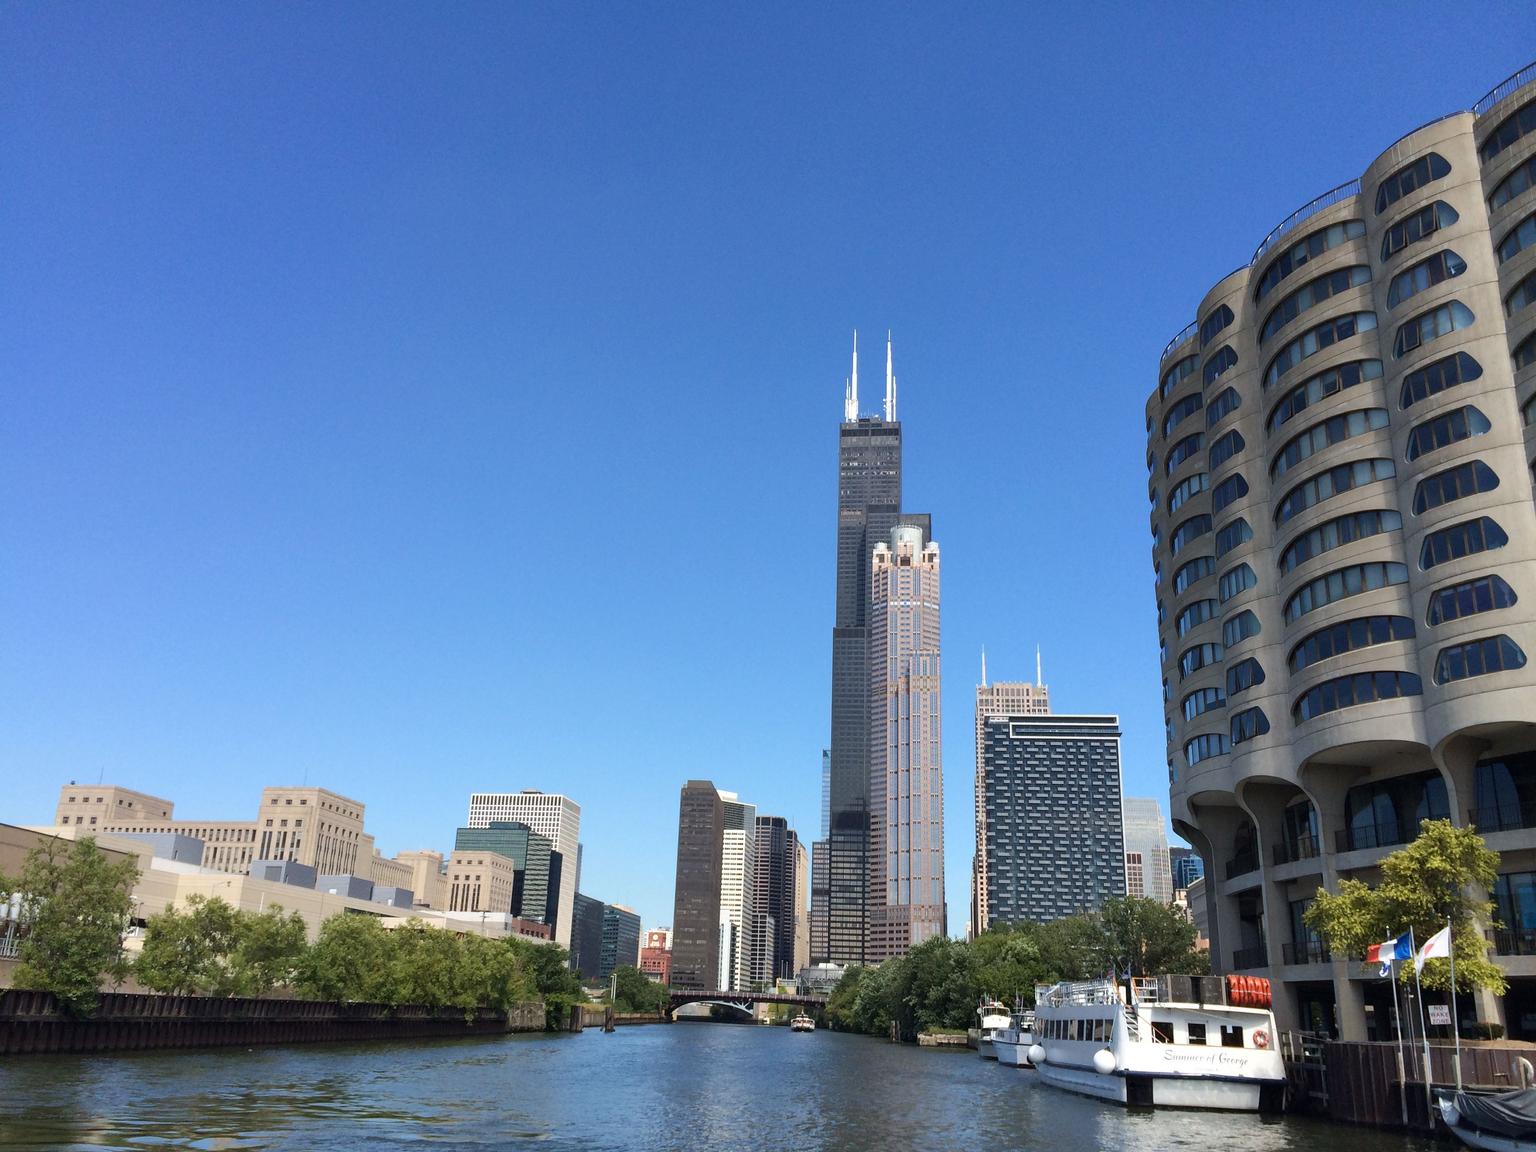 Willis tower seen from the river boat